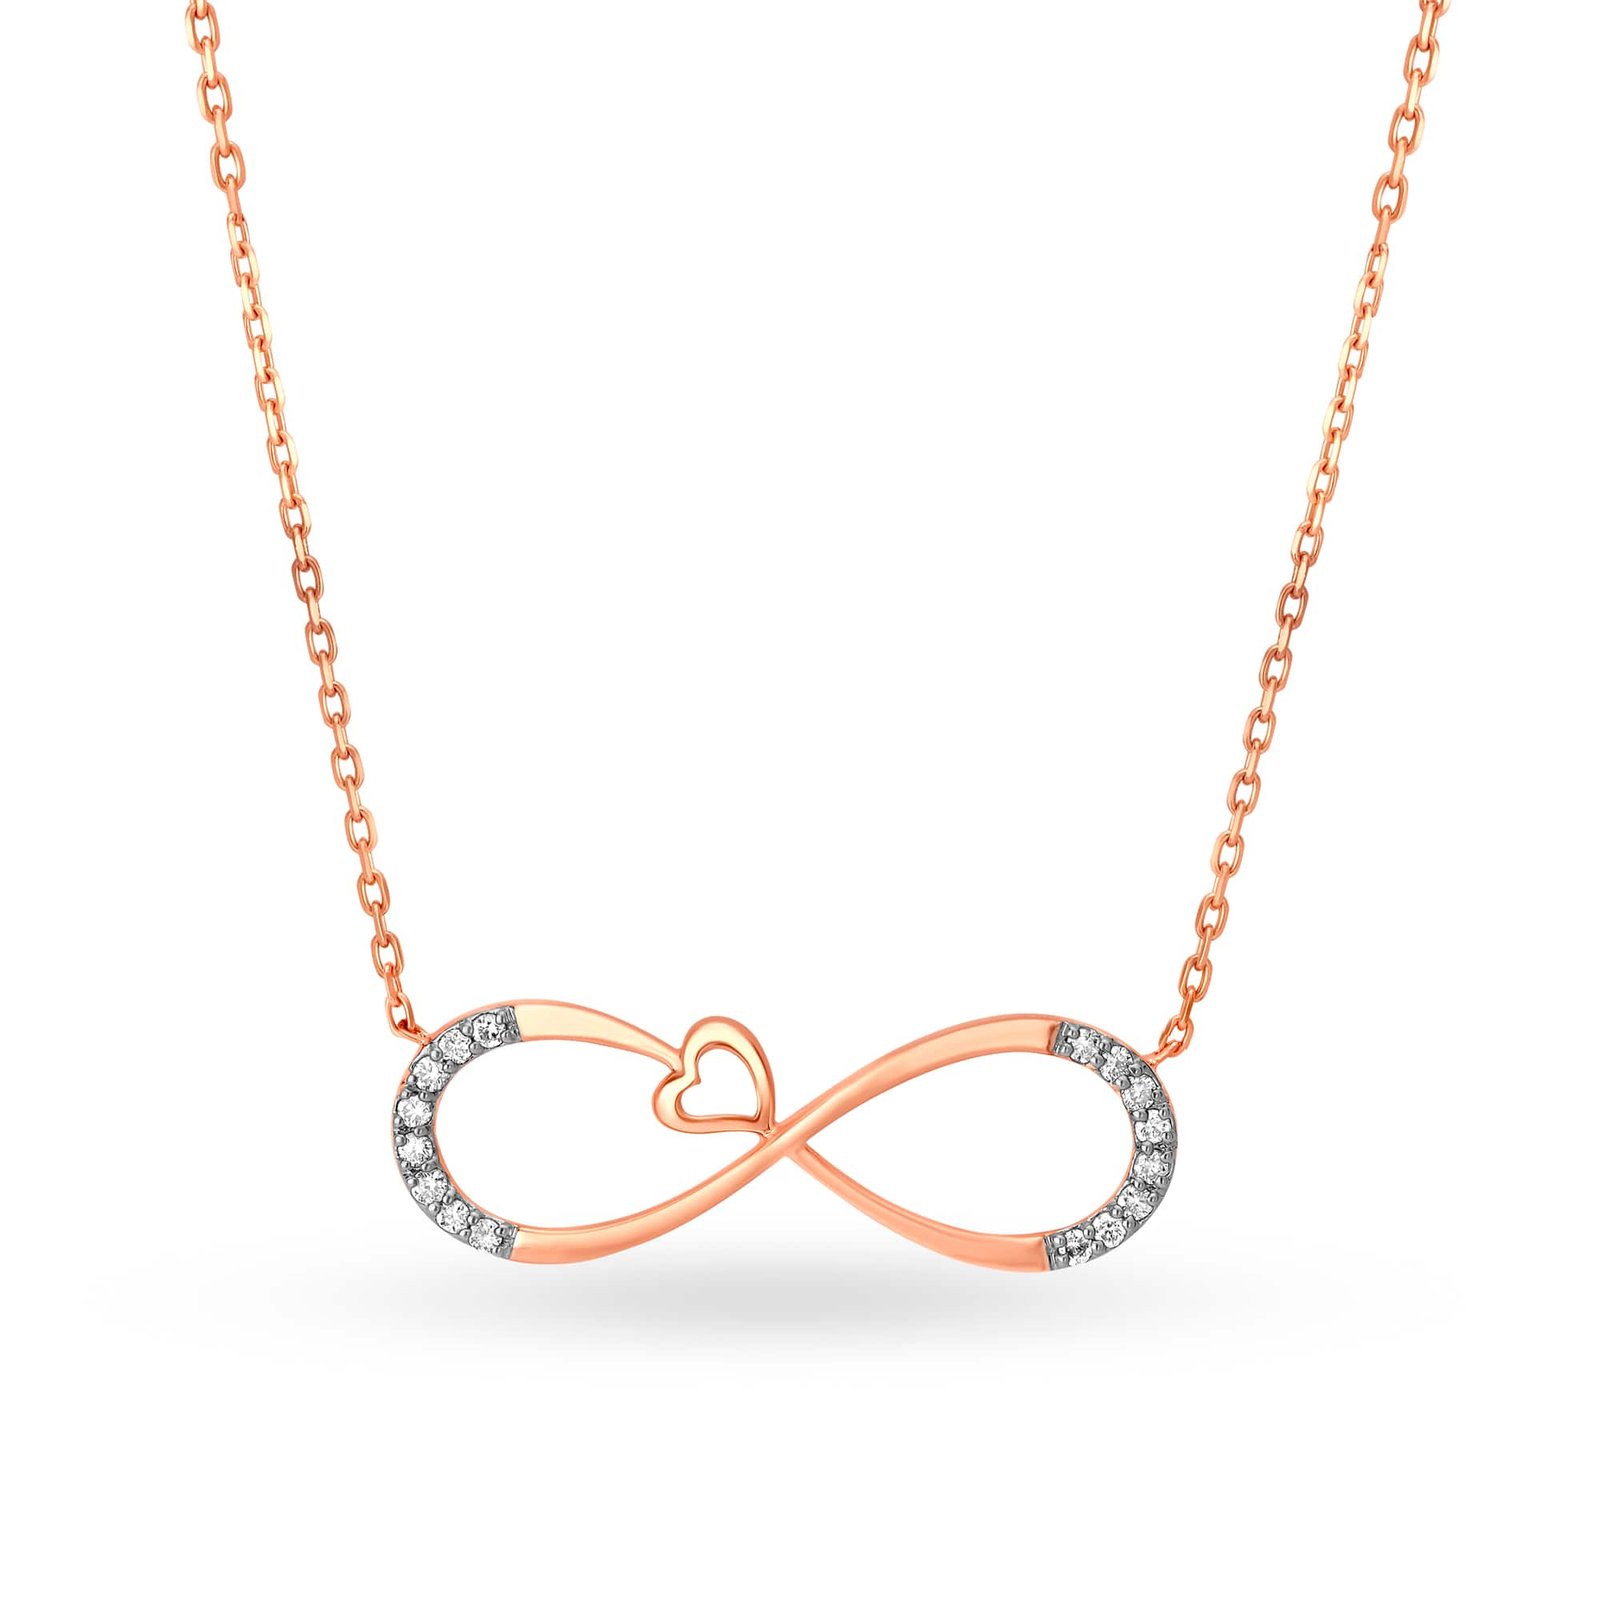 Intertwined Pendant - Mia by Tanishq